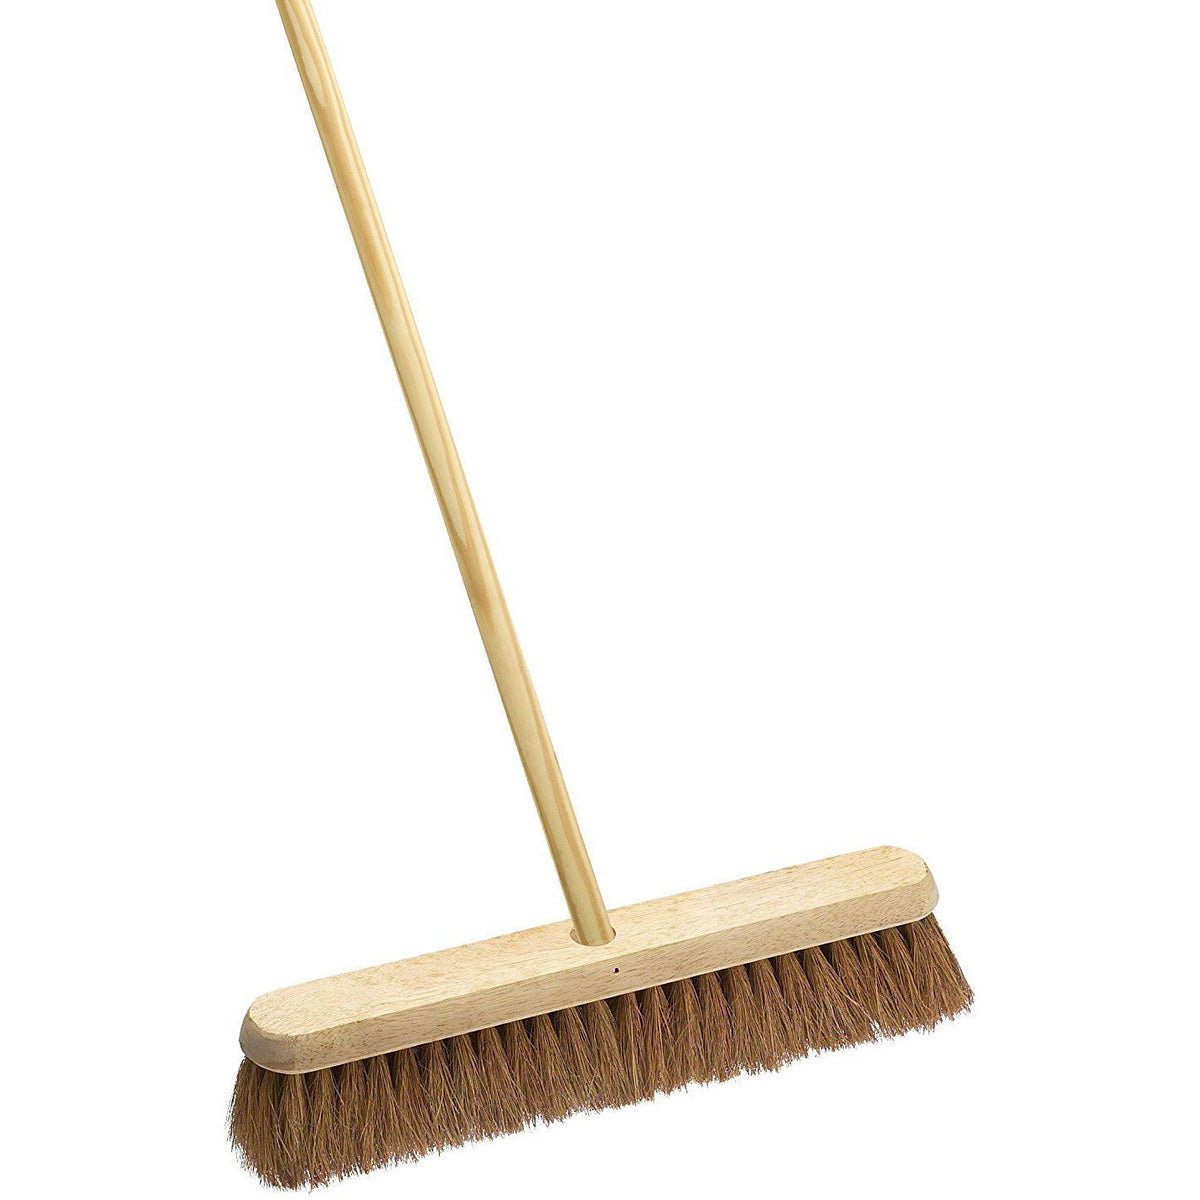 18" Soft Natural Coco Broom Head with Strong Wooden Brush Handle - The Dustpan and Brush Store